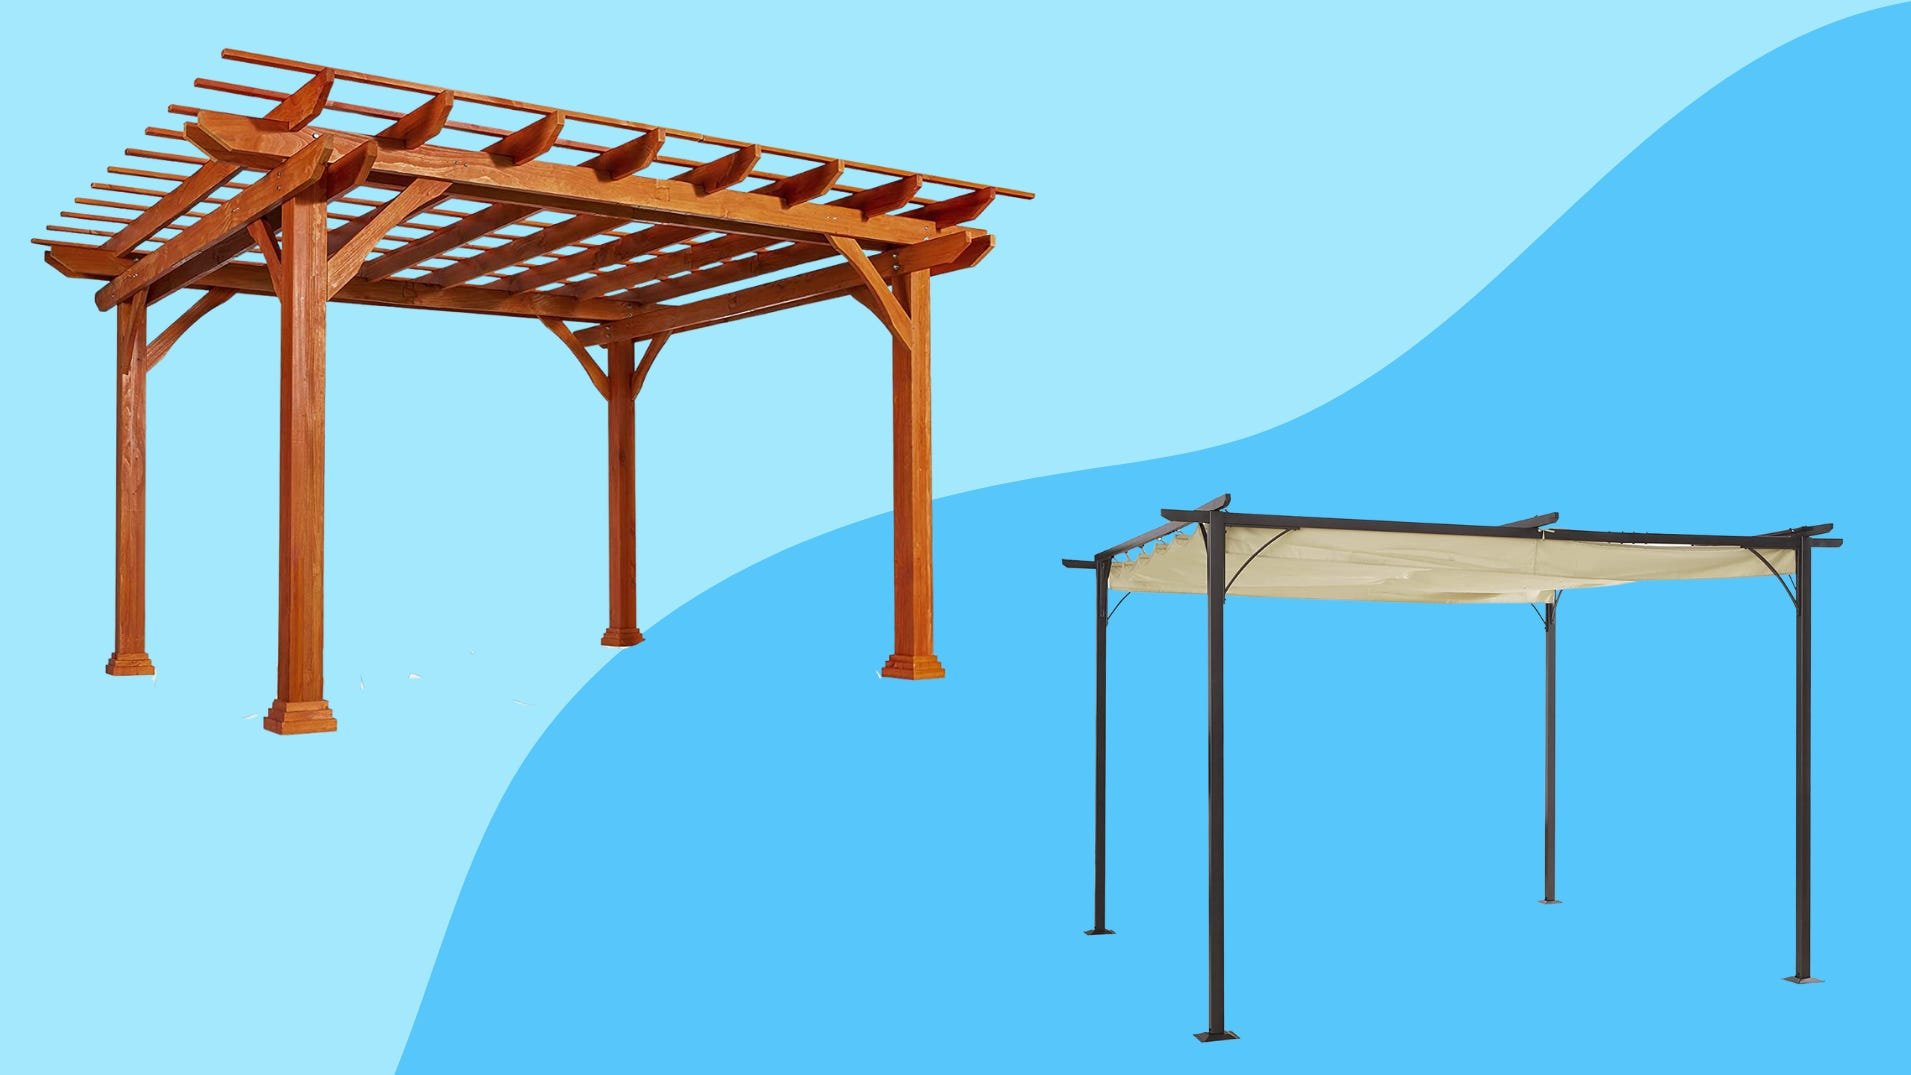 5 of the best pergola kits we could find if you want an easy DIY project